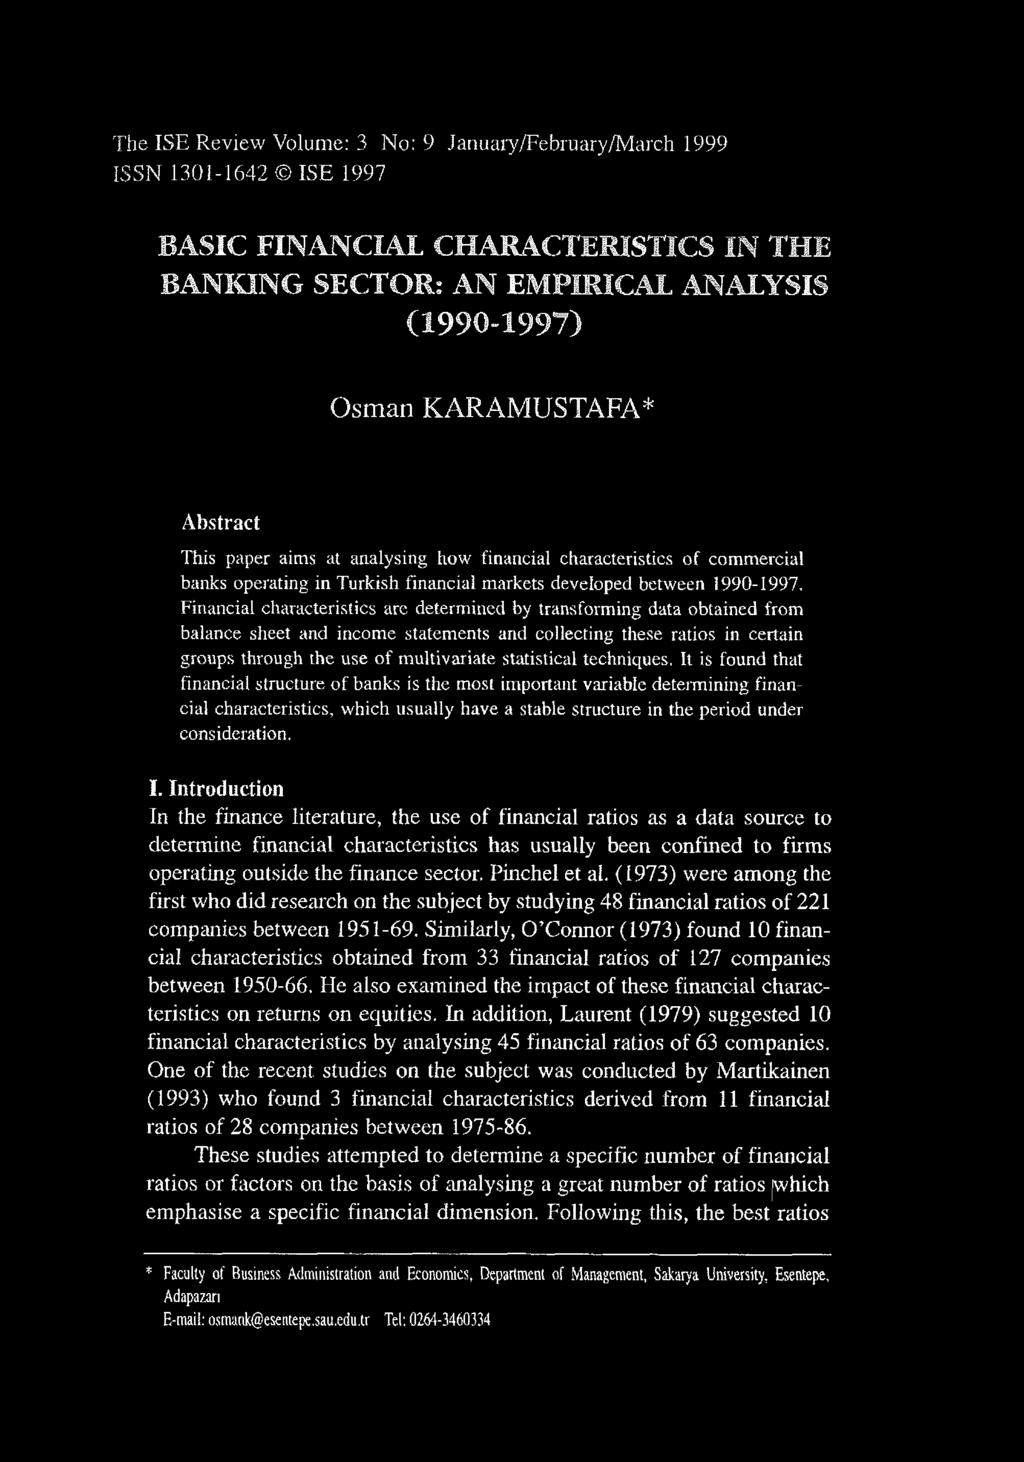 The ISE Review Volume: 3 No: 9 January/February /March 999 ISSN 30-642 IS E 997 BASIC FINANCIAL CHARACTERISTICS IN THE BANKING SECTOR: AN EMPIRICAL ANALYSIS ( 990-997) Osman KARAMUSTAFA* Abstract T h